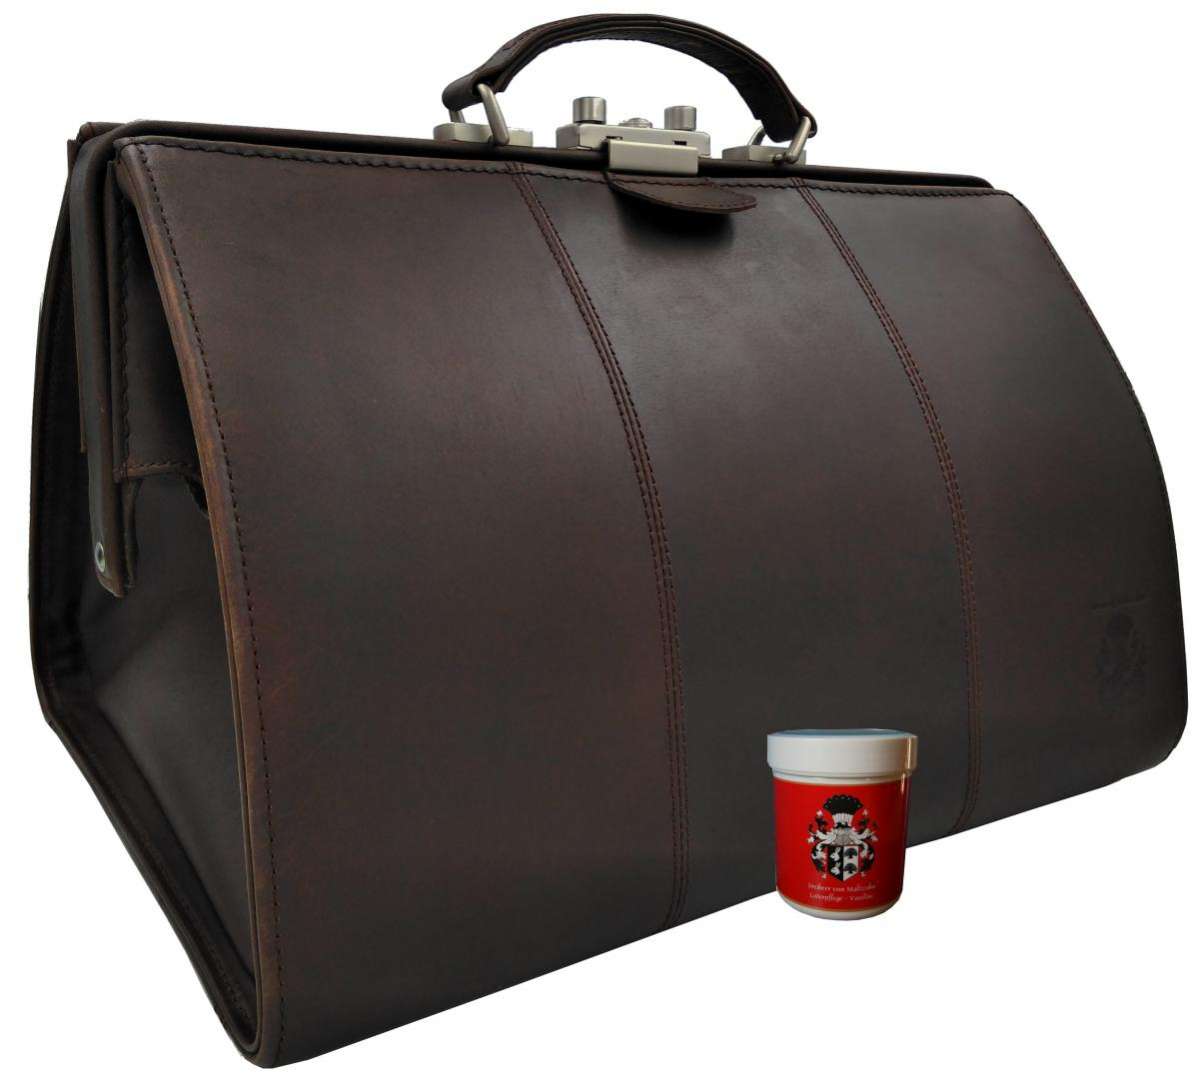 Doctors Leather Medical Bags Designed For Physicians